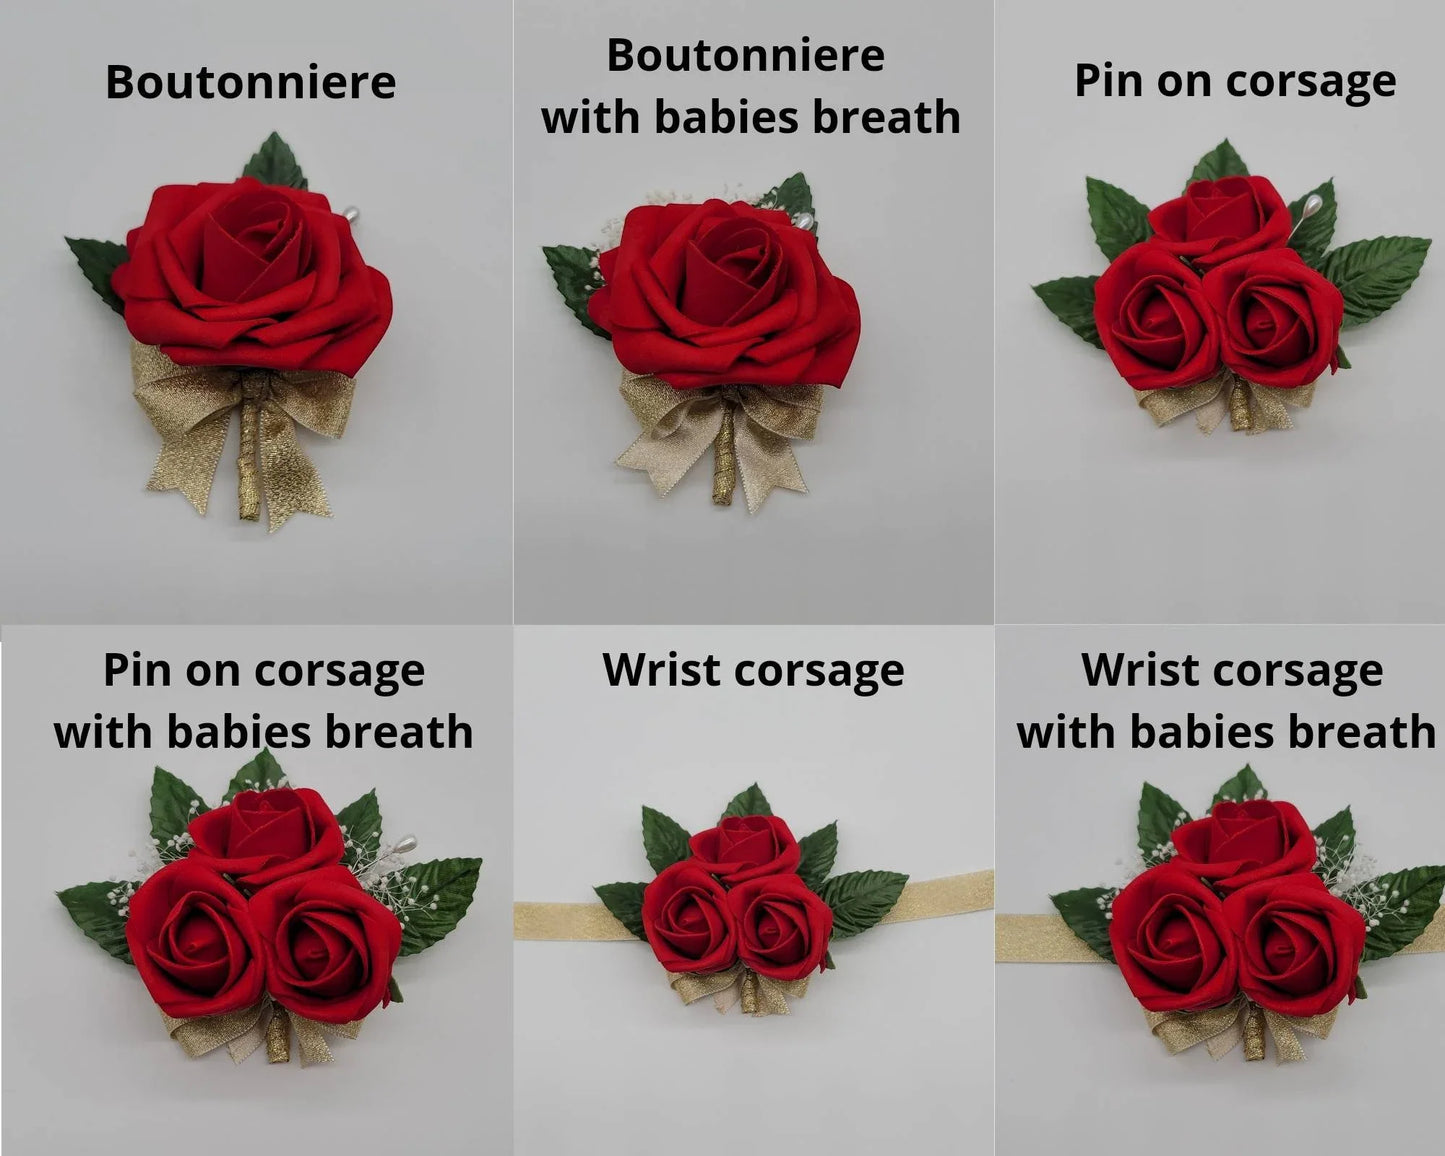 White Boutonnieres and Corsages